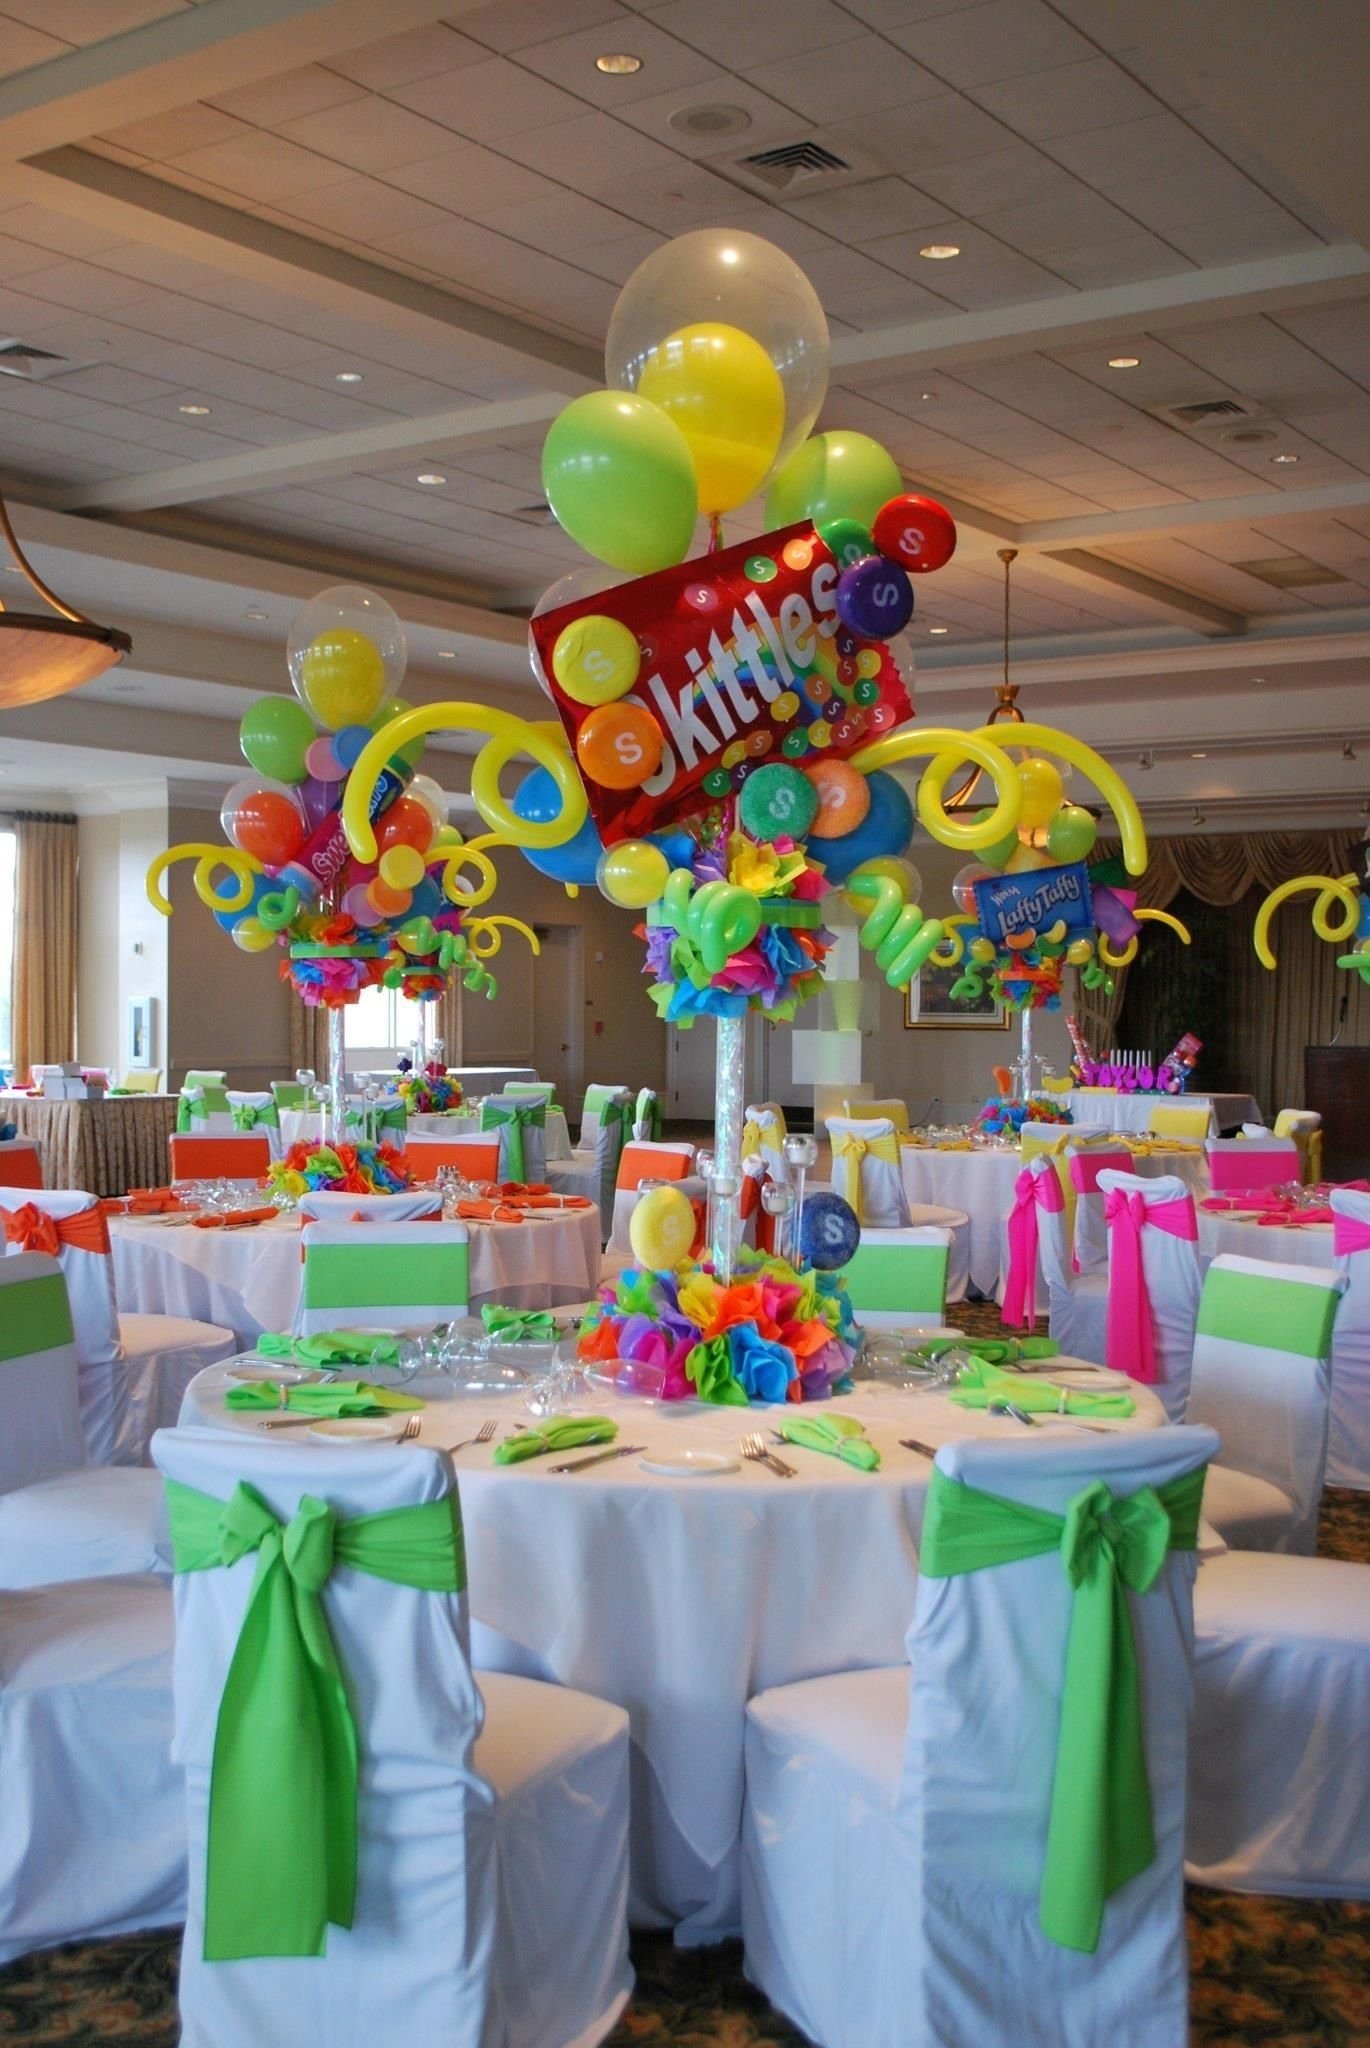 10 Great Themed Party Ideas For Adults candy themed bat mitzvah event decor adult centerpieces party 2 2022